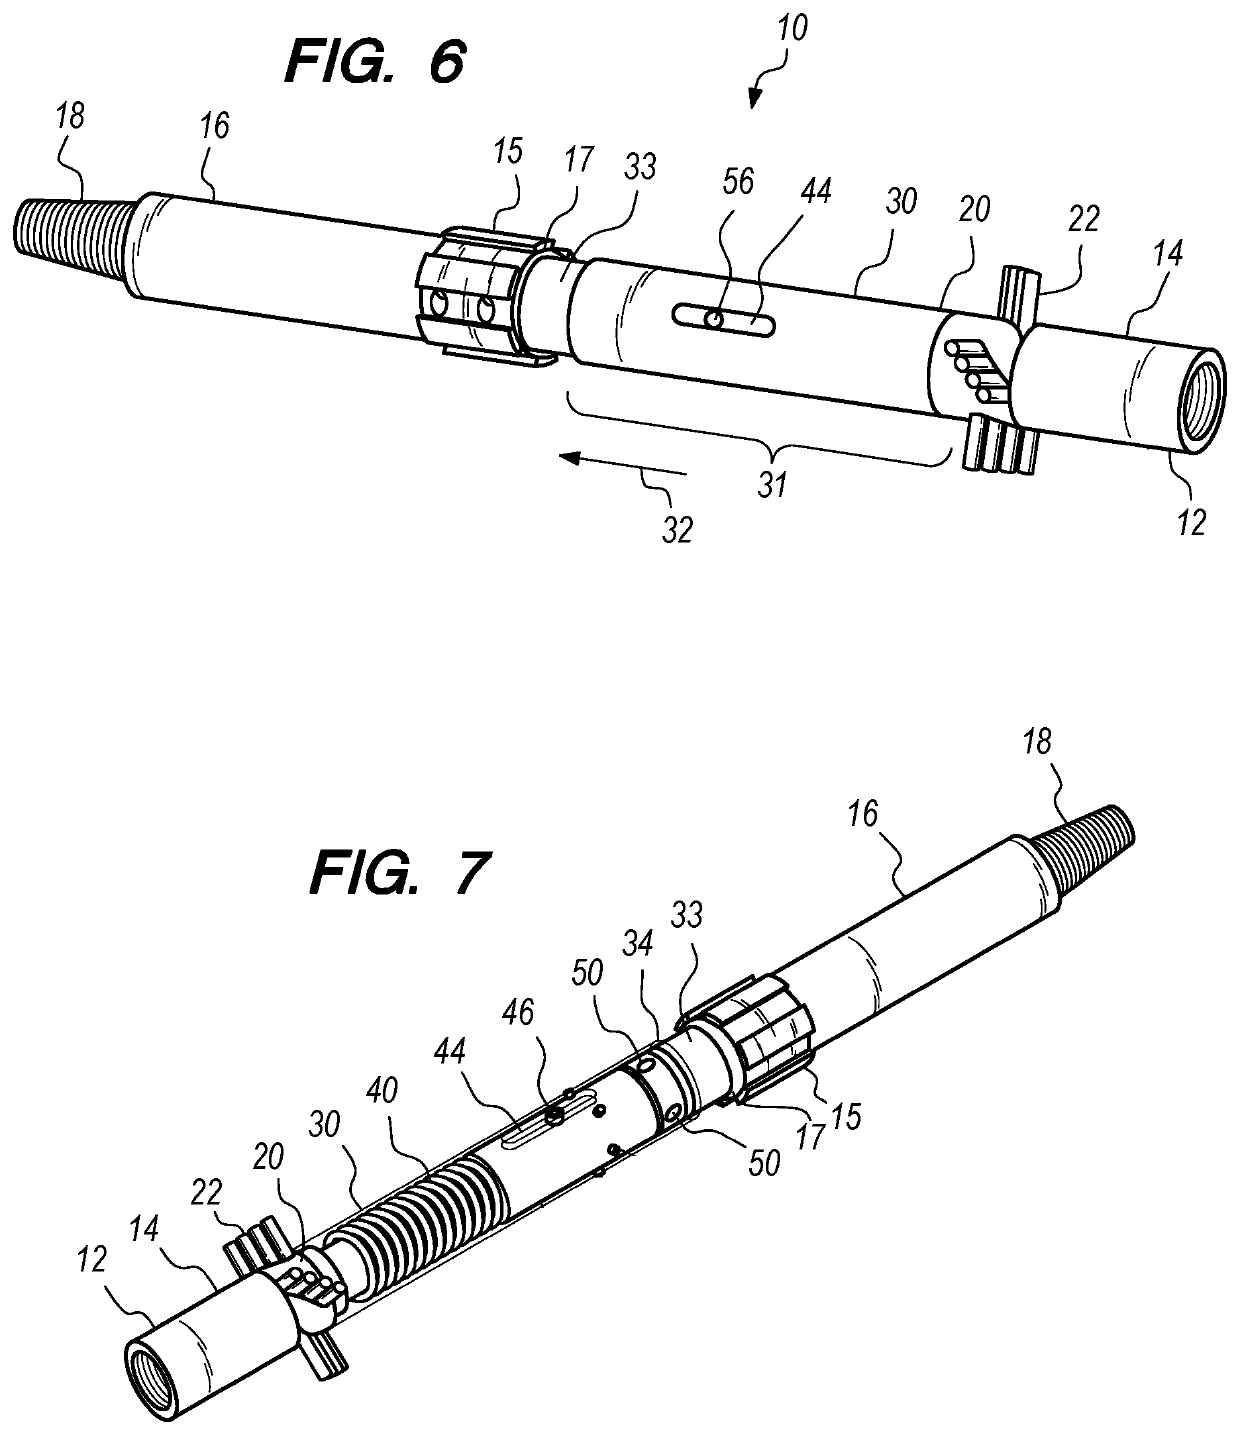 Brush actuator for actuating downhole tools